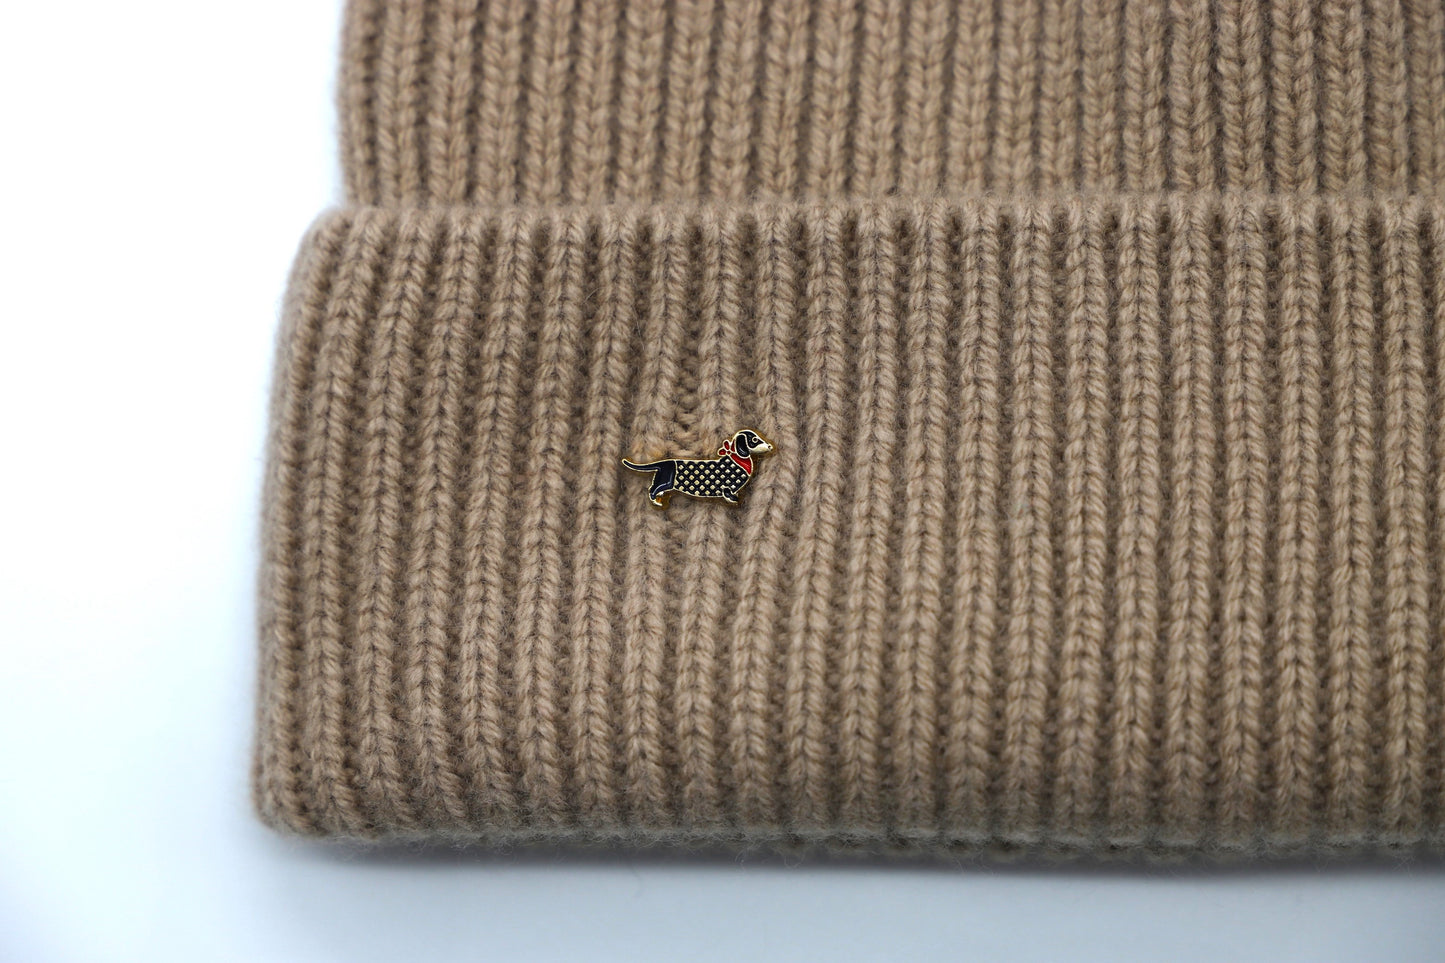 This Hat is a finest hat with a classic silhouette from Villanelle. A luxurious accessory for women and for men made from the softest natural sheep wool for extreme comfort and warmth. It is made in a trendy caramel beige color accompanied by an elegant dog pin. This product is sourced and manufactured in Poland.